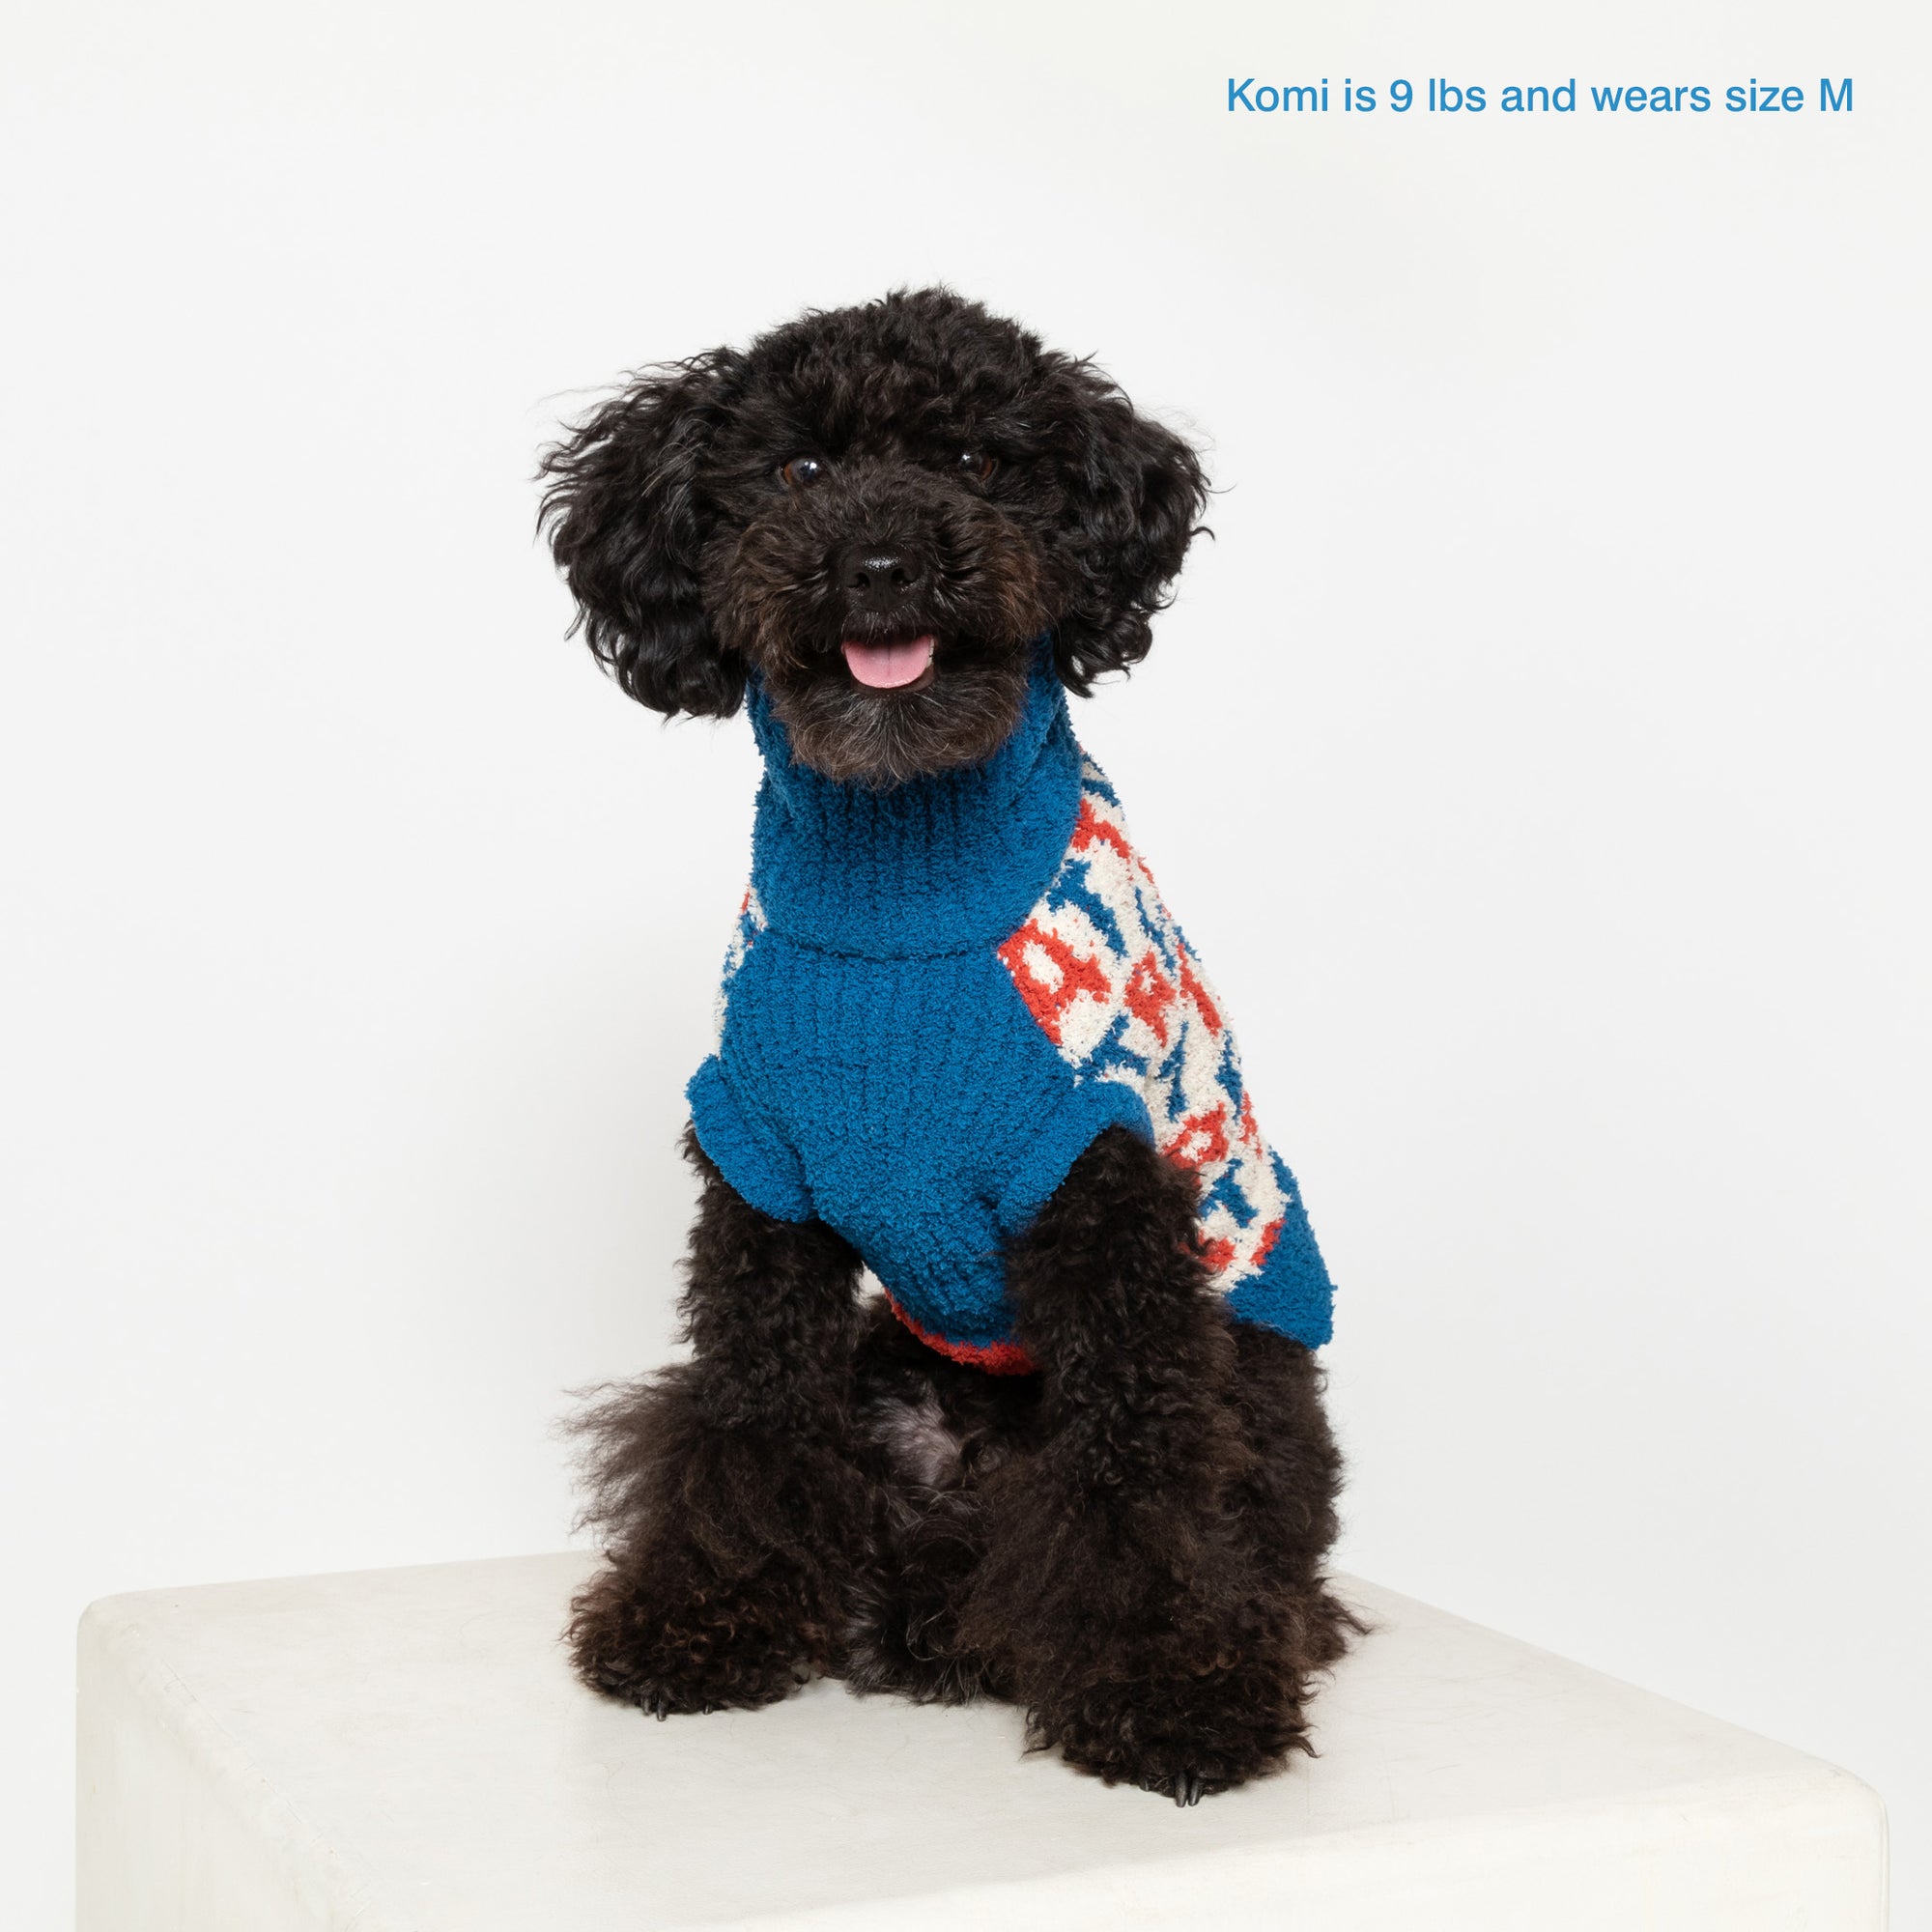 A charming black poodle named Komi weighs 9 lbs and looks cheerful in a size M blue sweater, adorned with vibrant red and white "Treat" lettering, perfect for its petite stature.